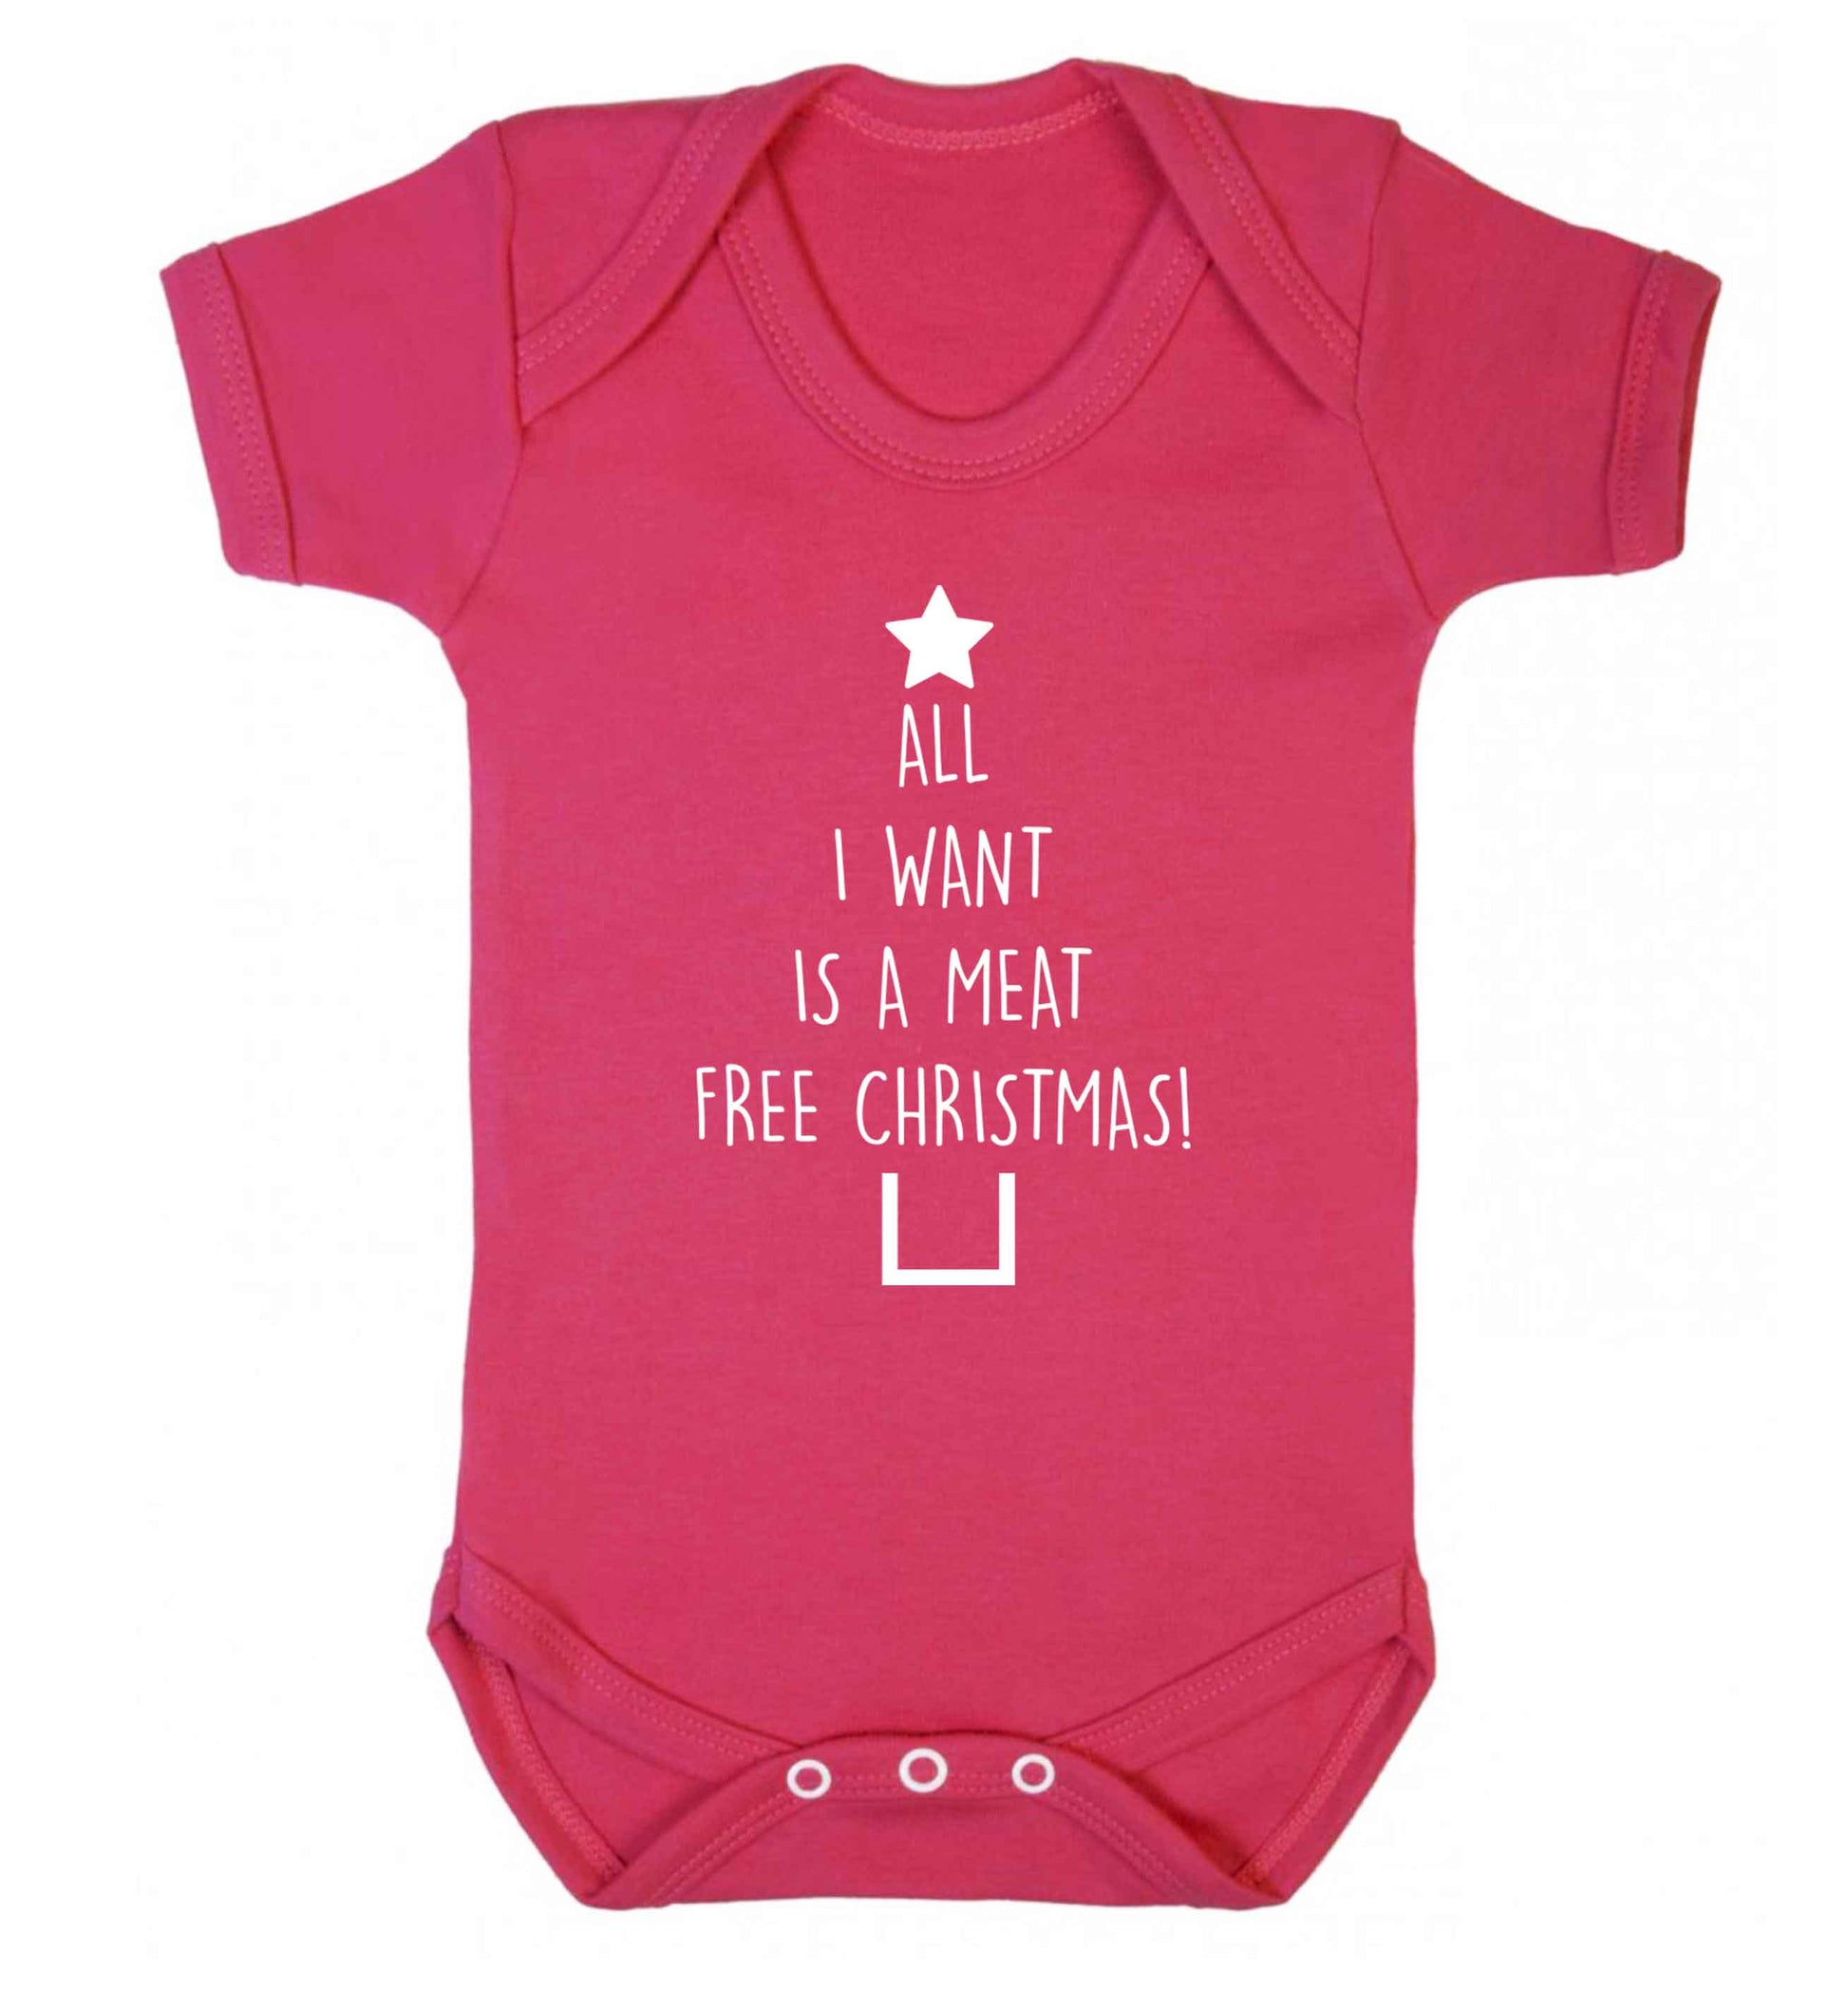 All I want is a meat free Christmas Baby Vest dark pink 18-24 months